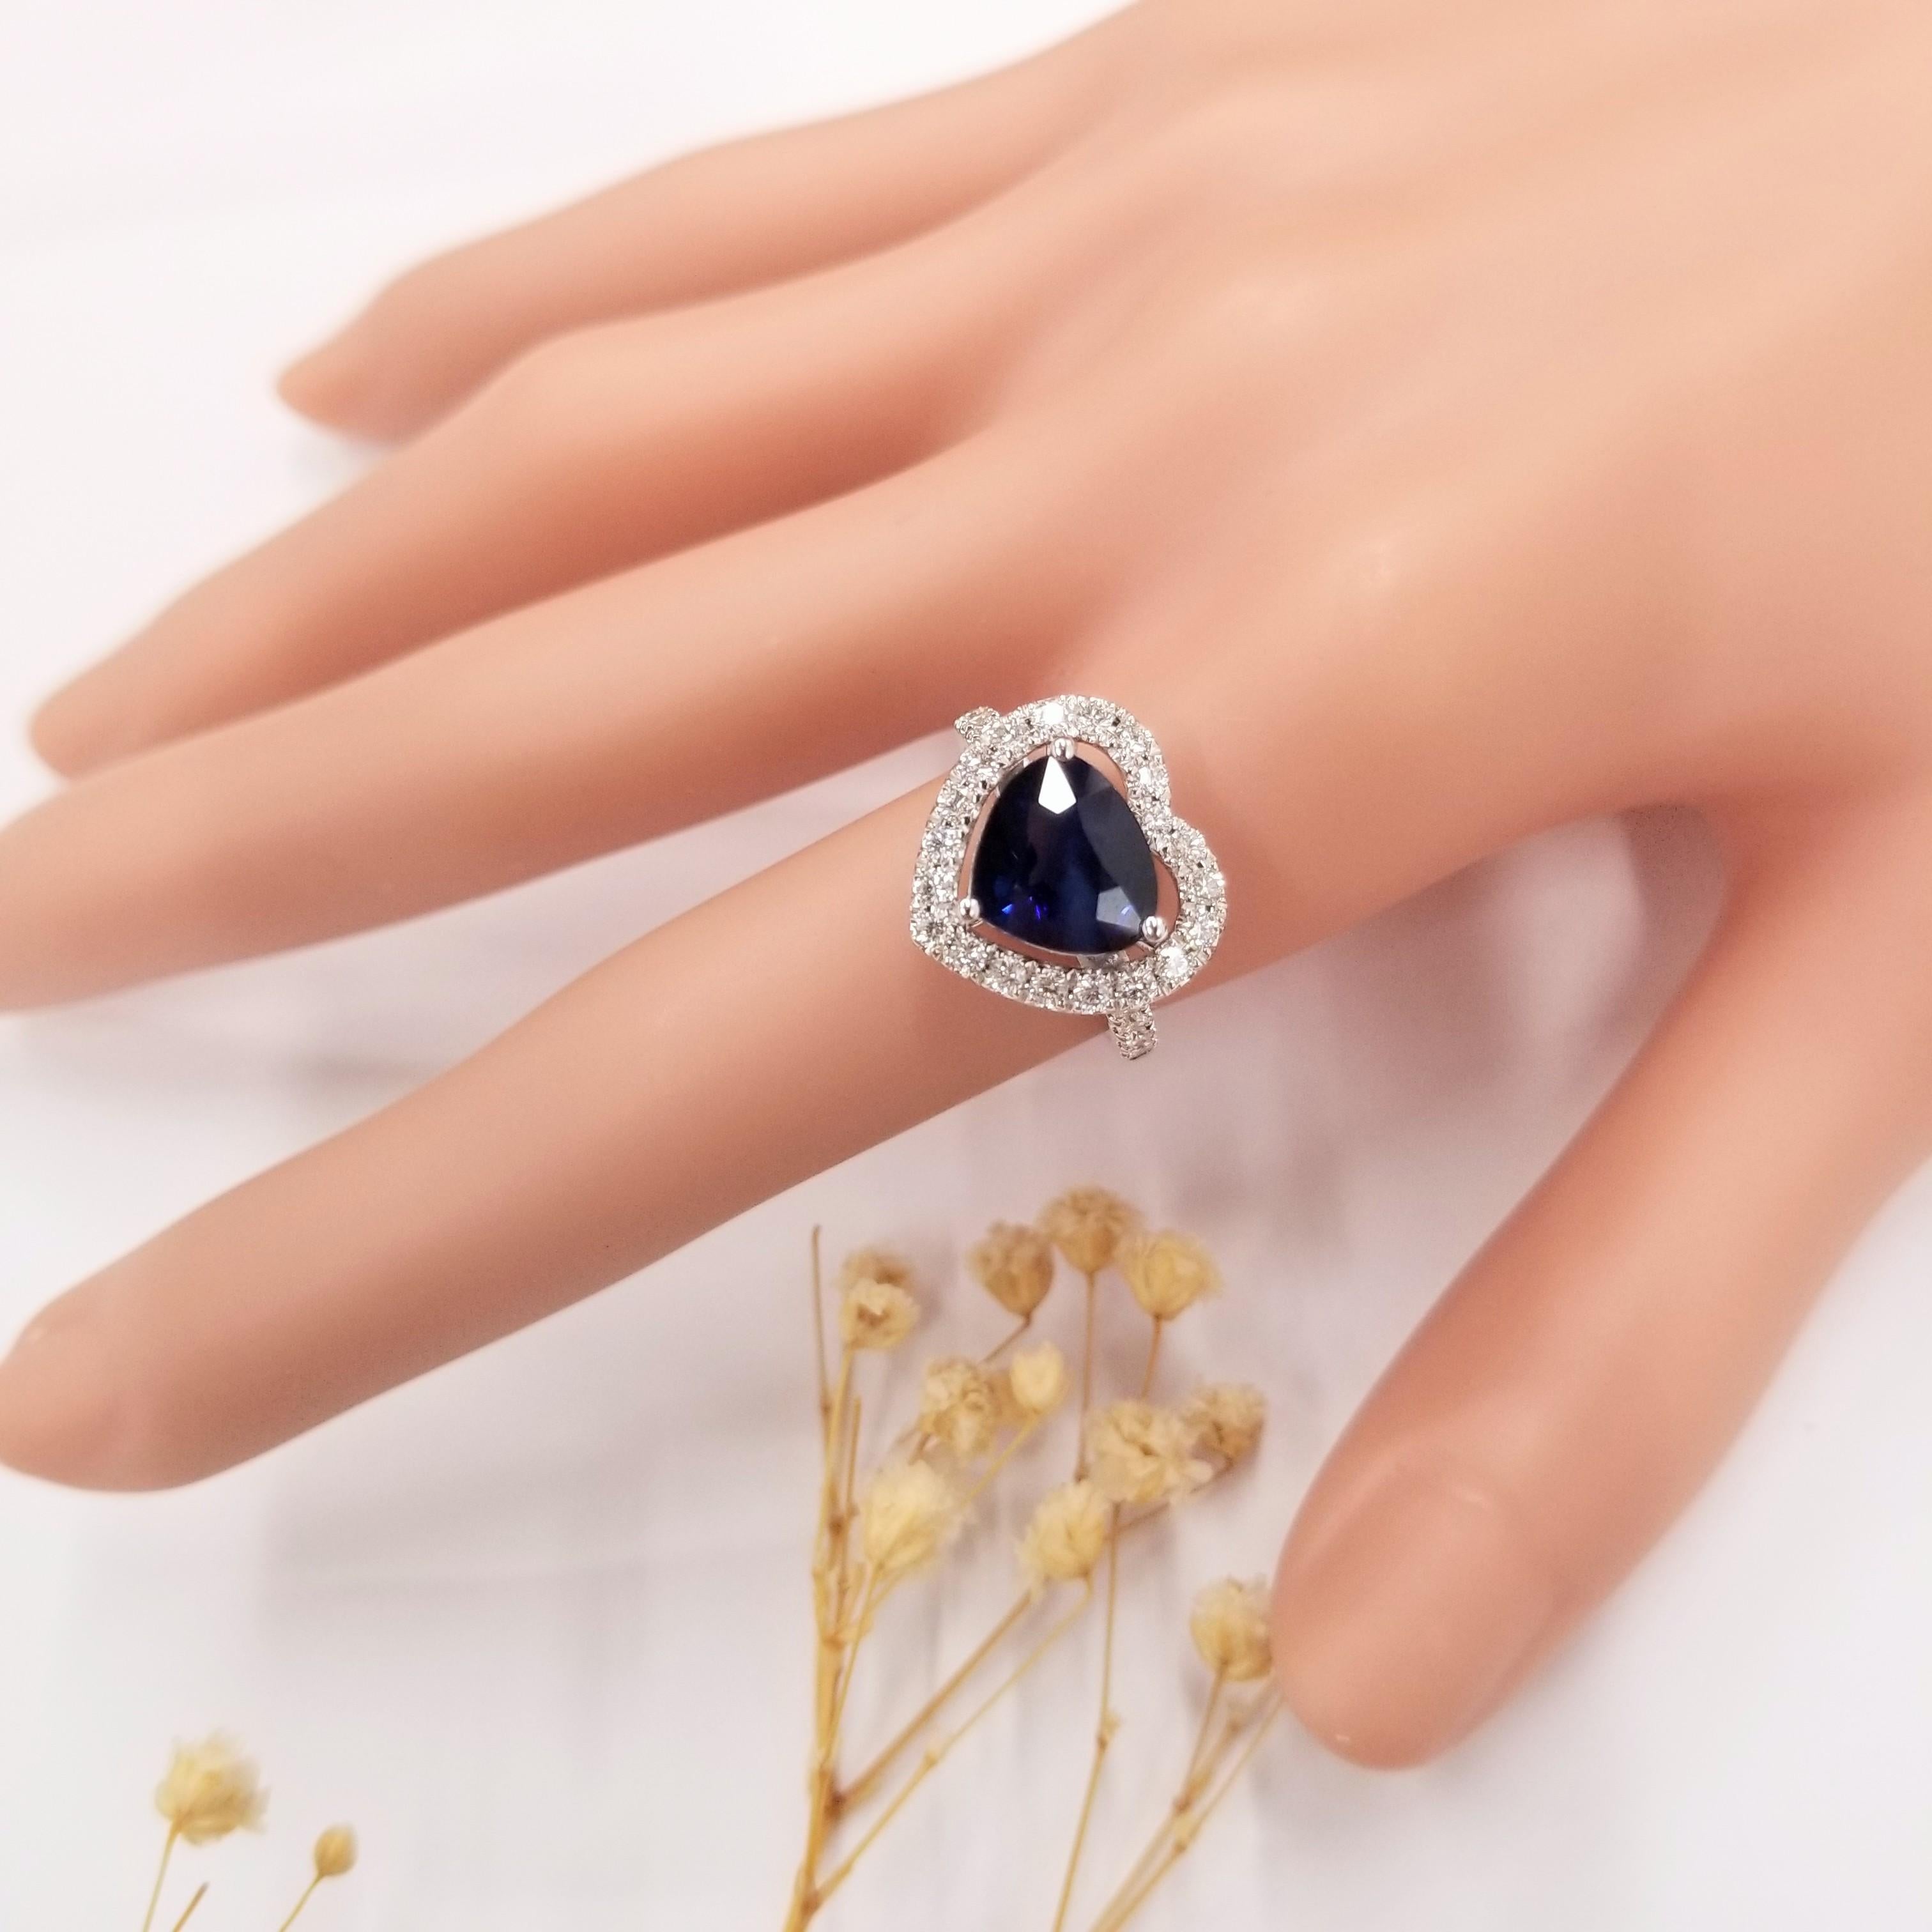 Introducing a magnificent piece of jewelry, this IGI certified ring is a true epitome of elegance and beauty. Crafted in 18K white gold, it features a stunning 3.15 carat intense blue sapphire in a captivating pear shape at its center. The intense